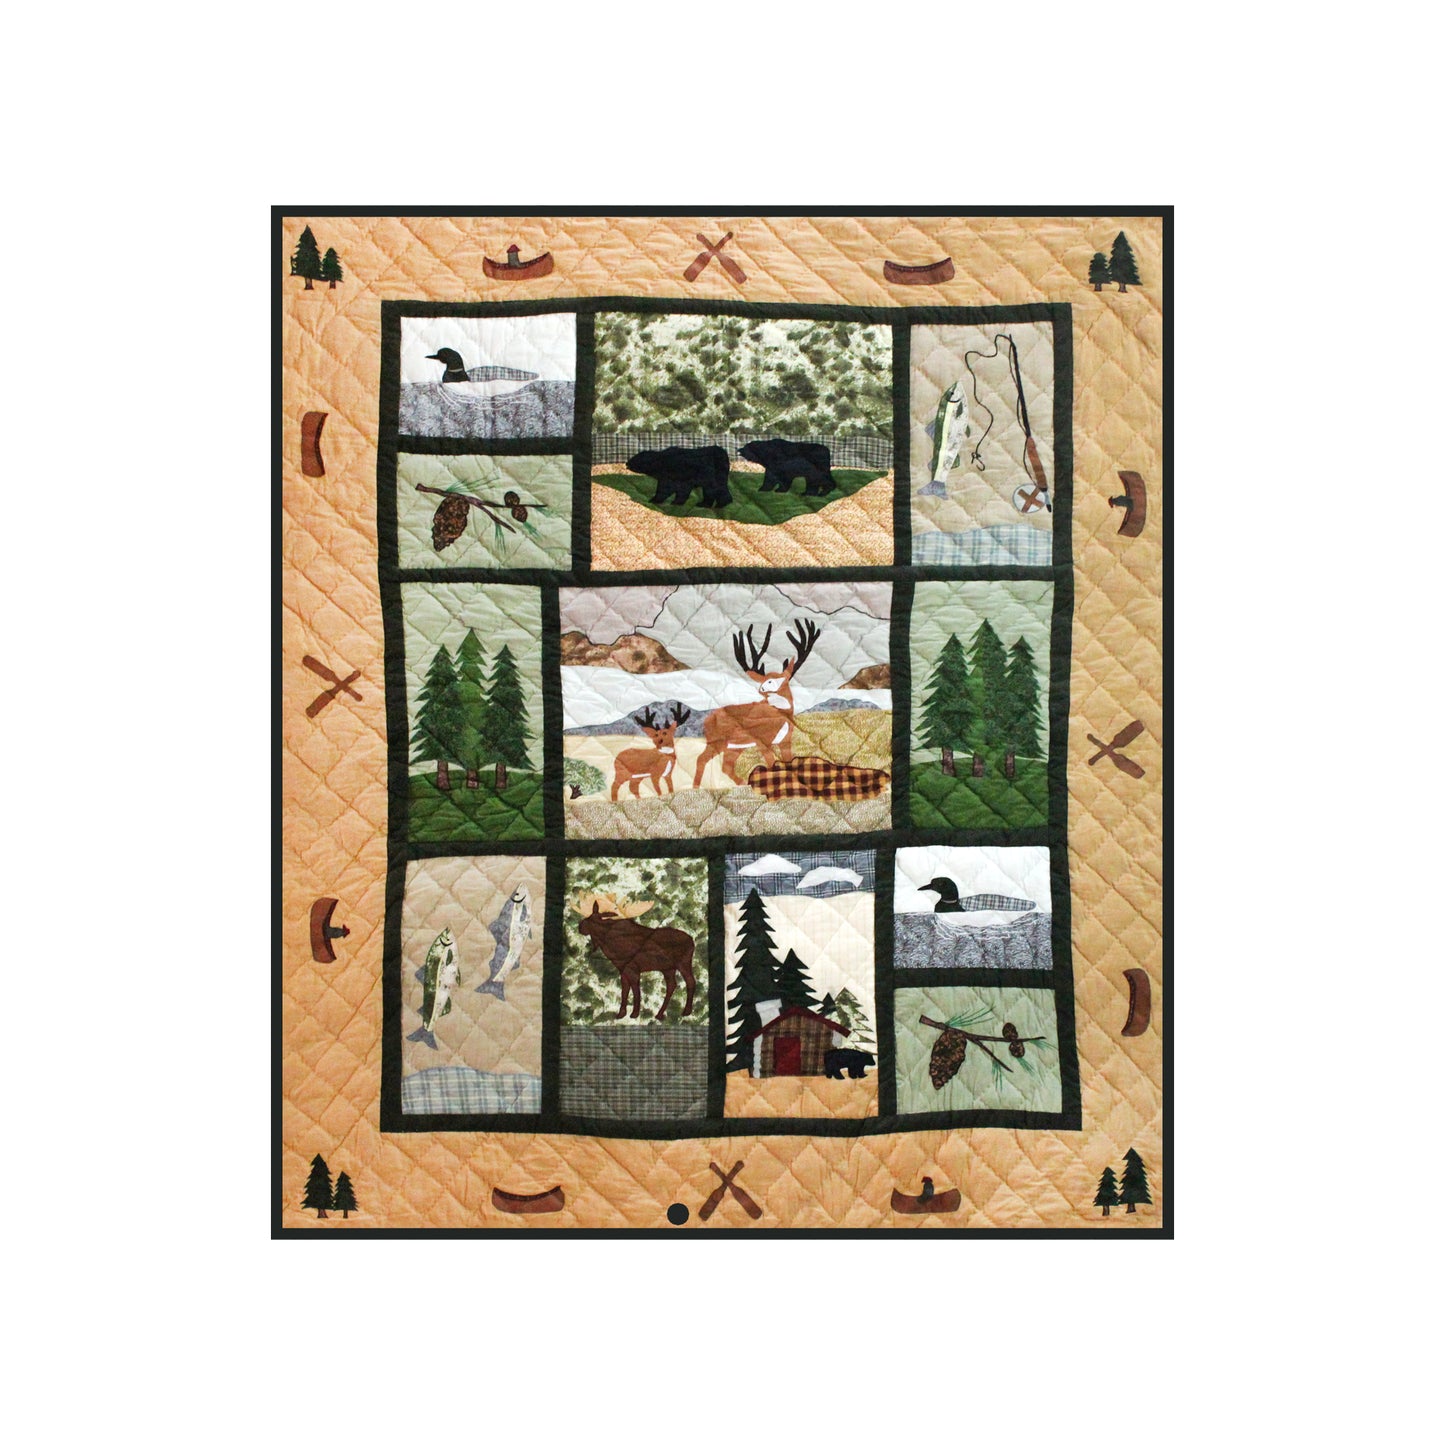 Great Outdoors Quilt, Hand cut and Appliqued cotton fabric motifs.